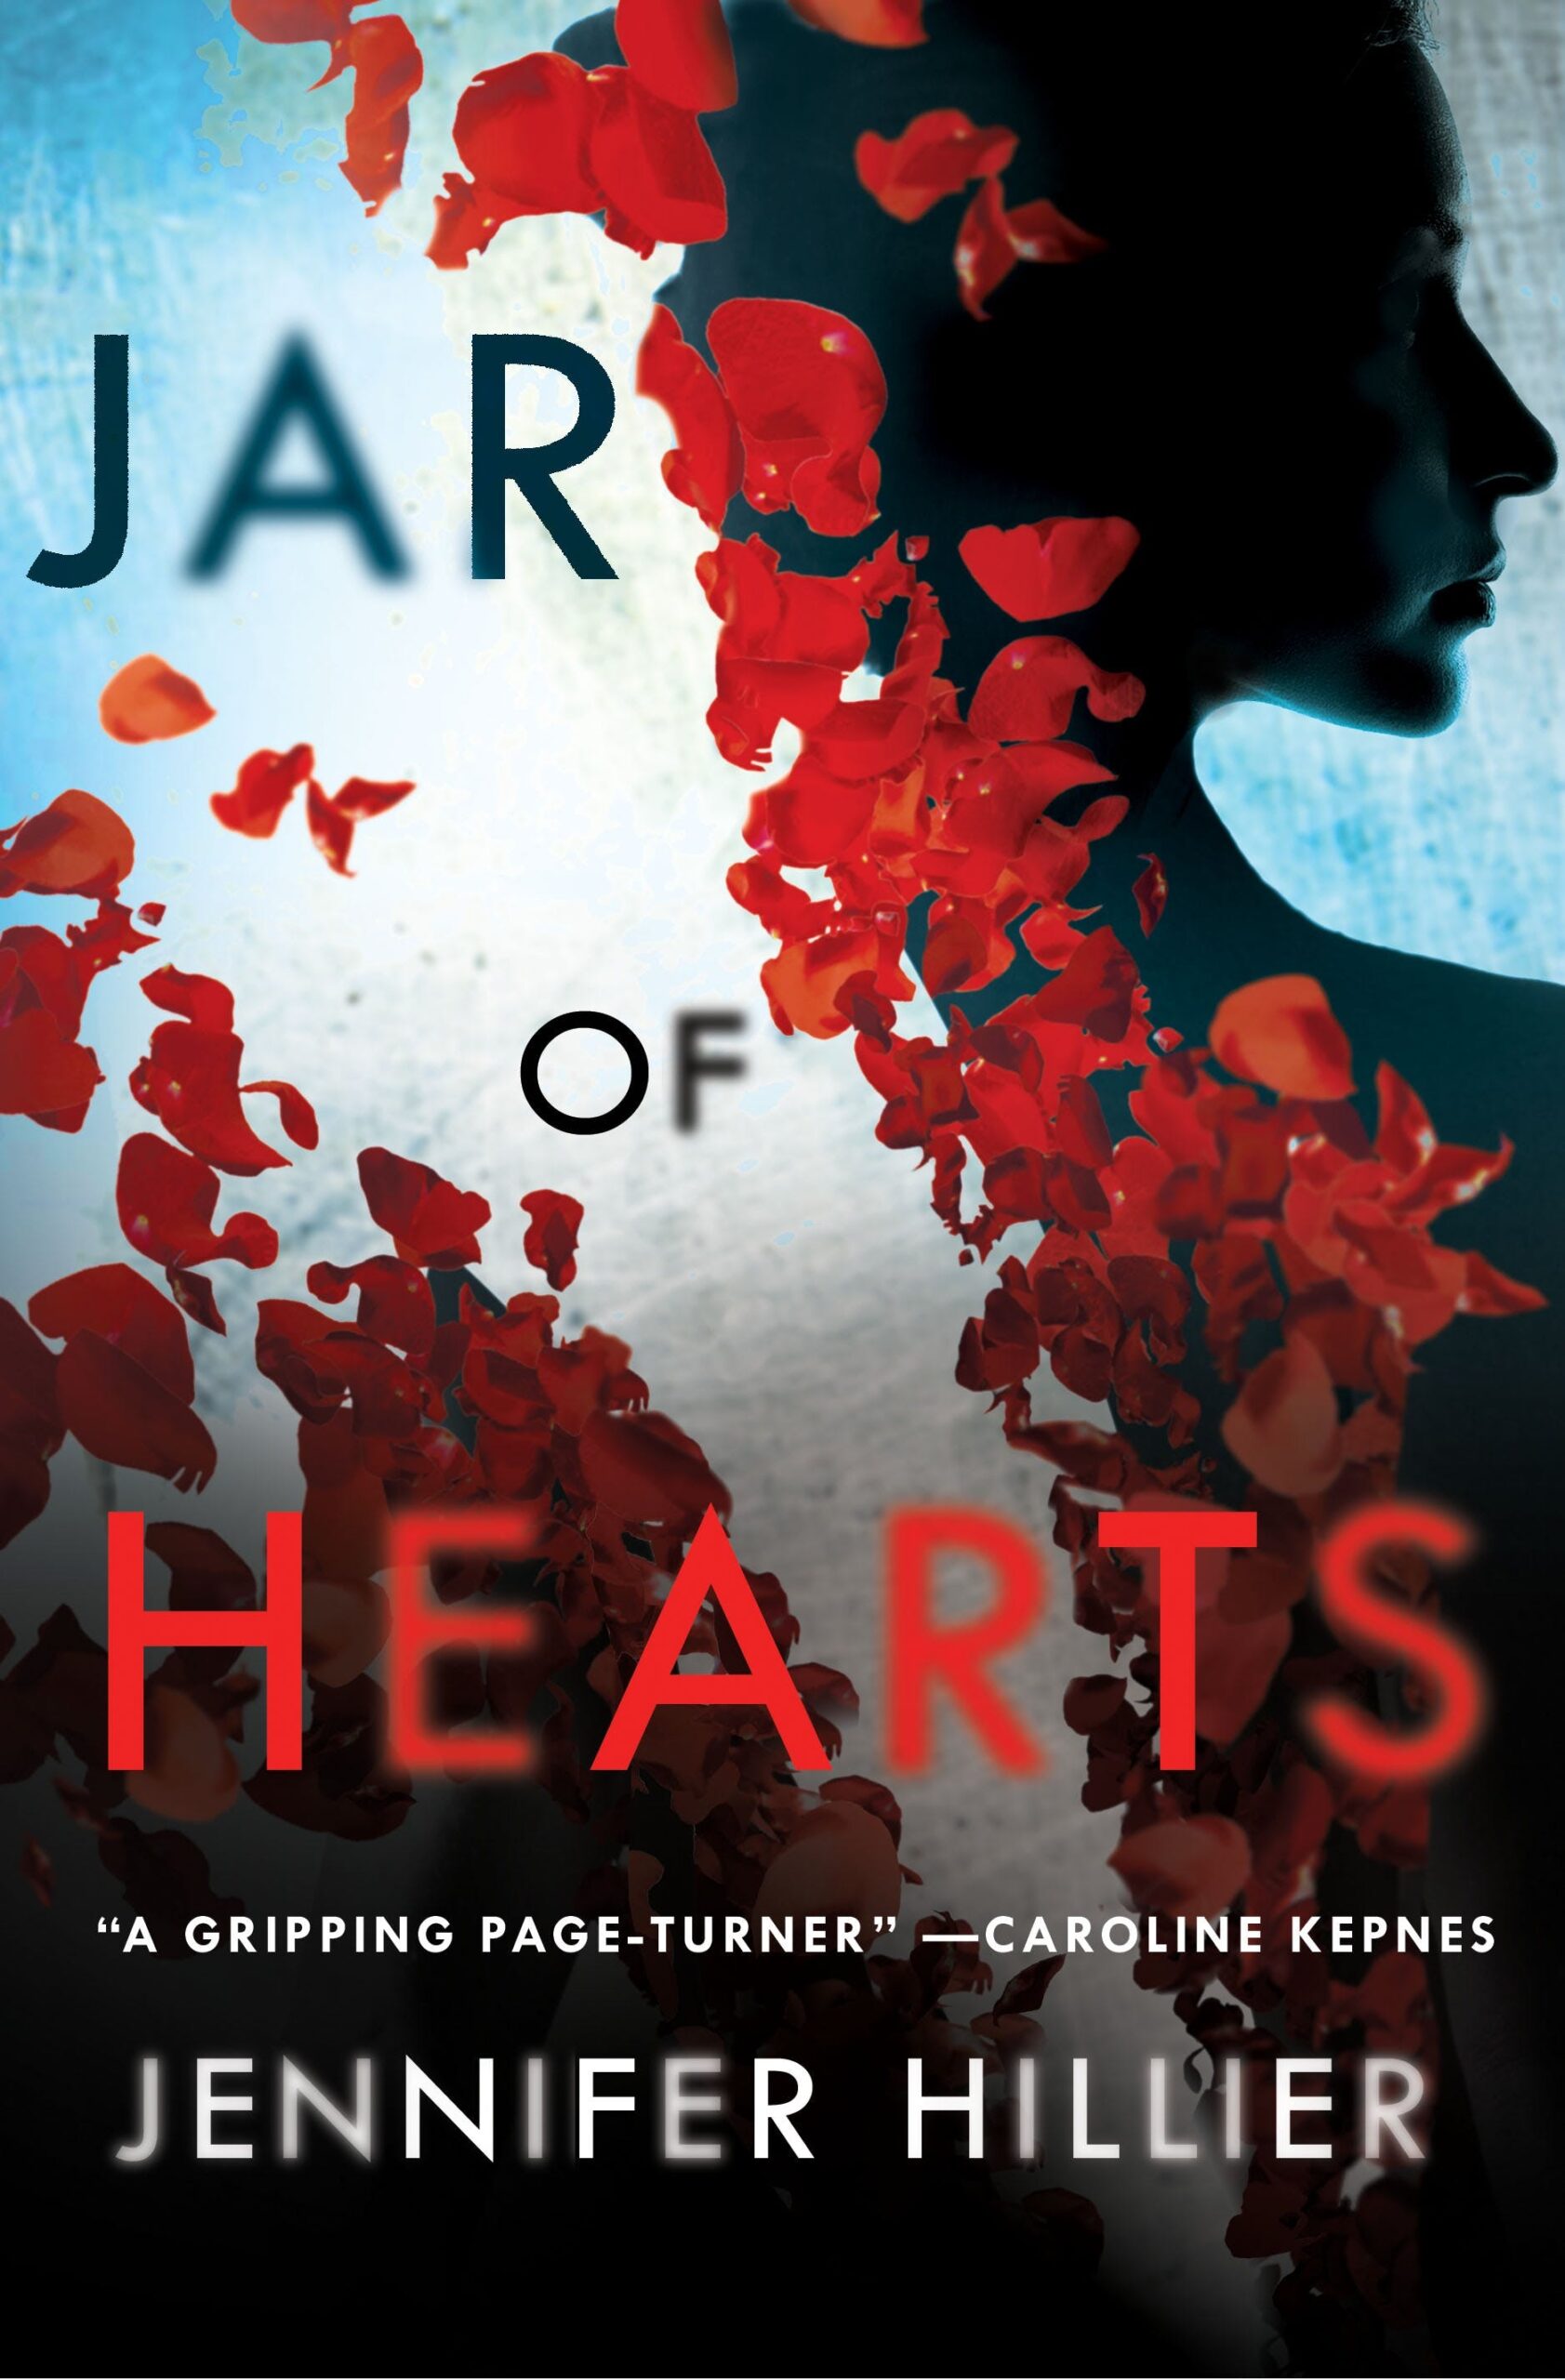 See Jar of Hearts in Catalog